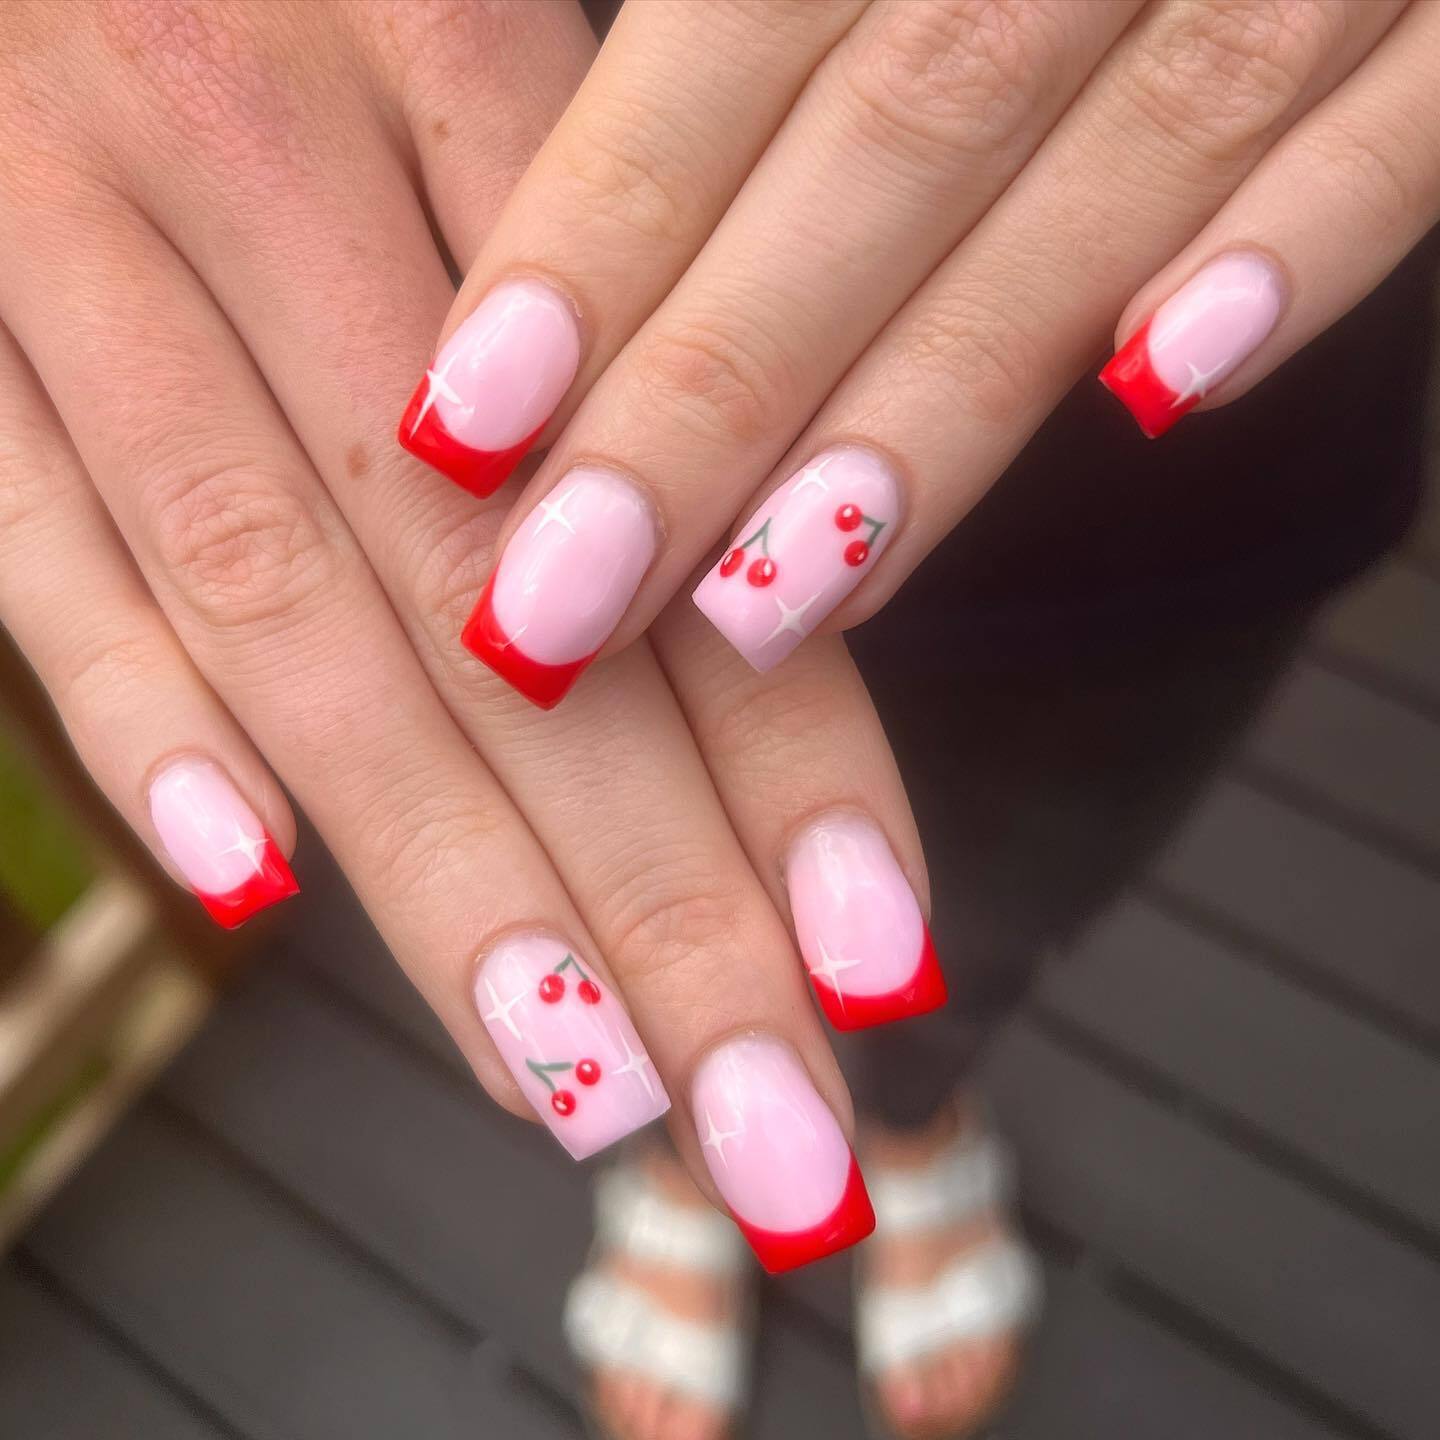 Red Nails With Cherry Design